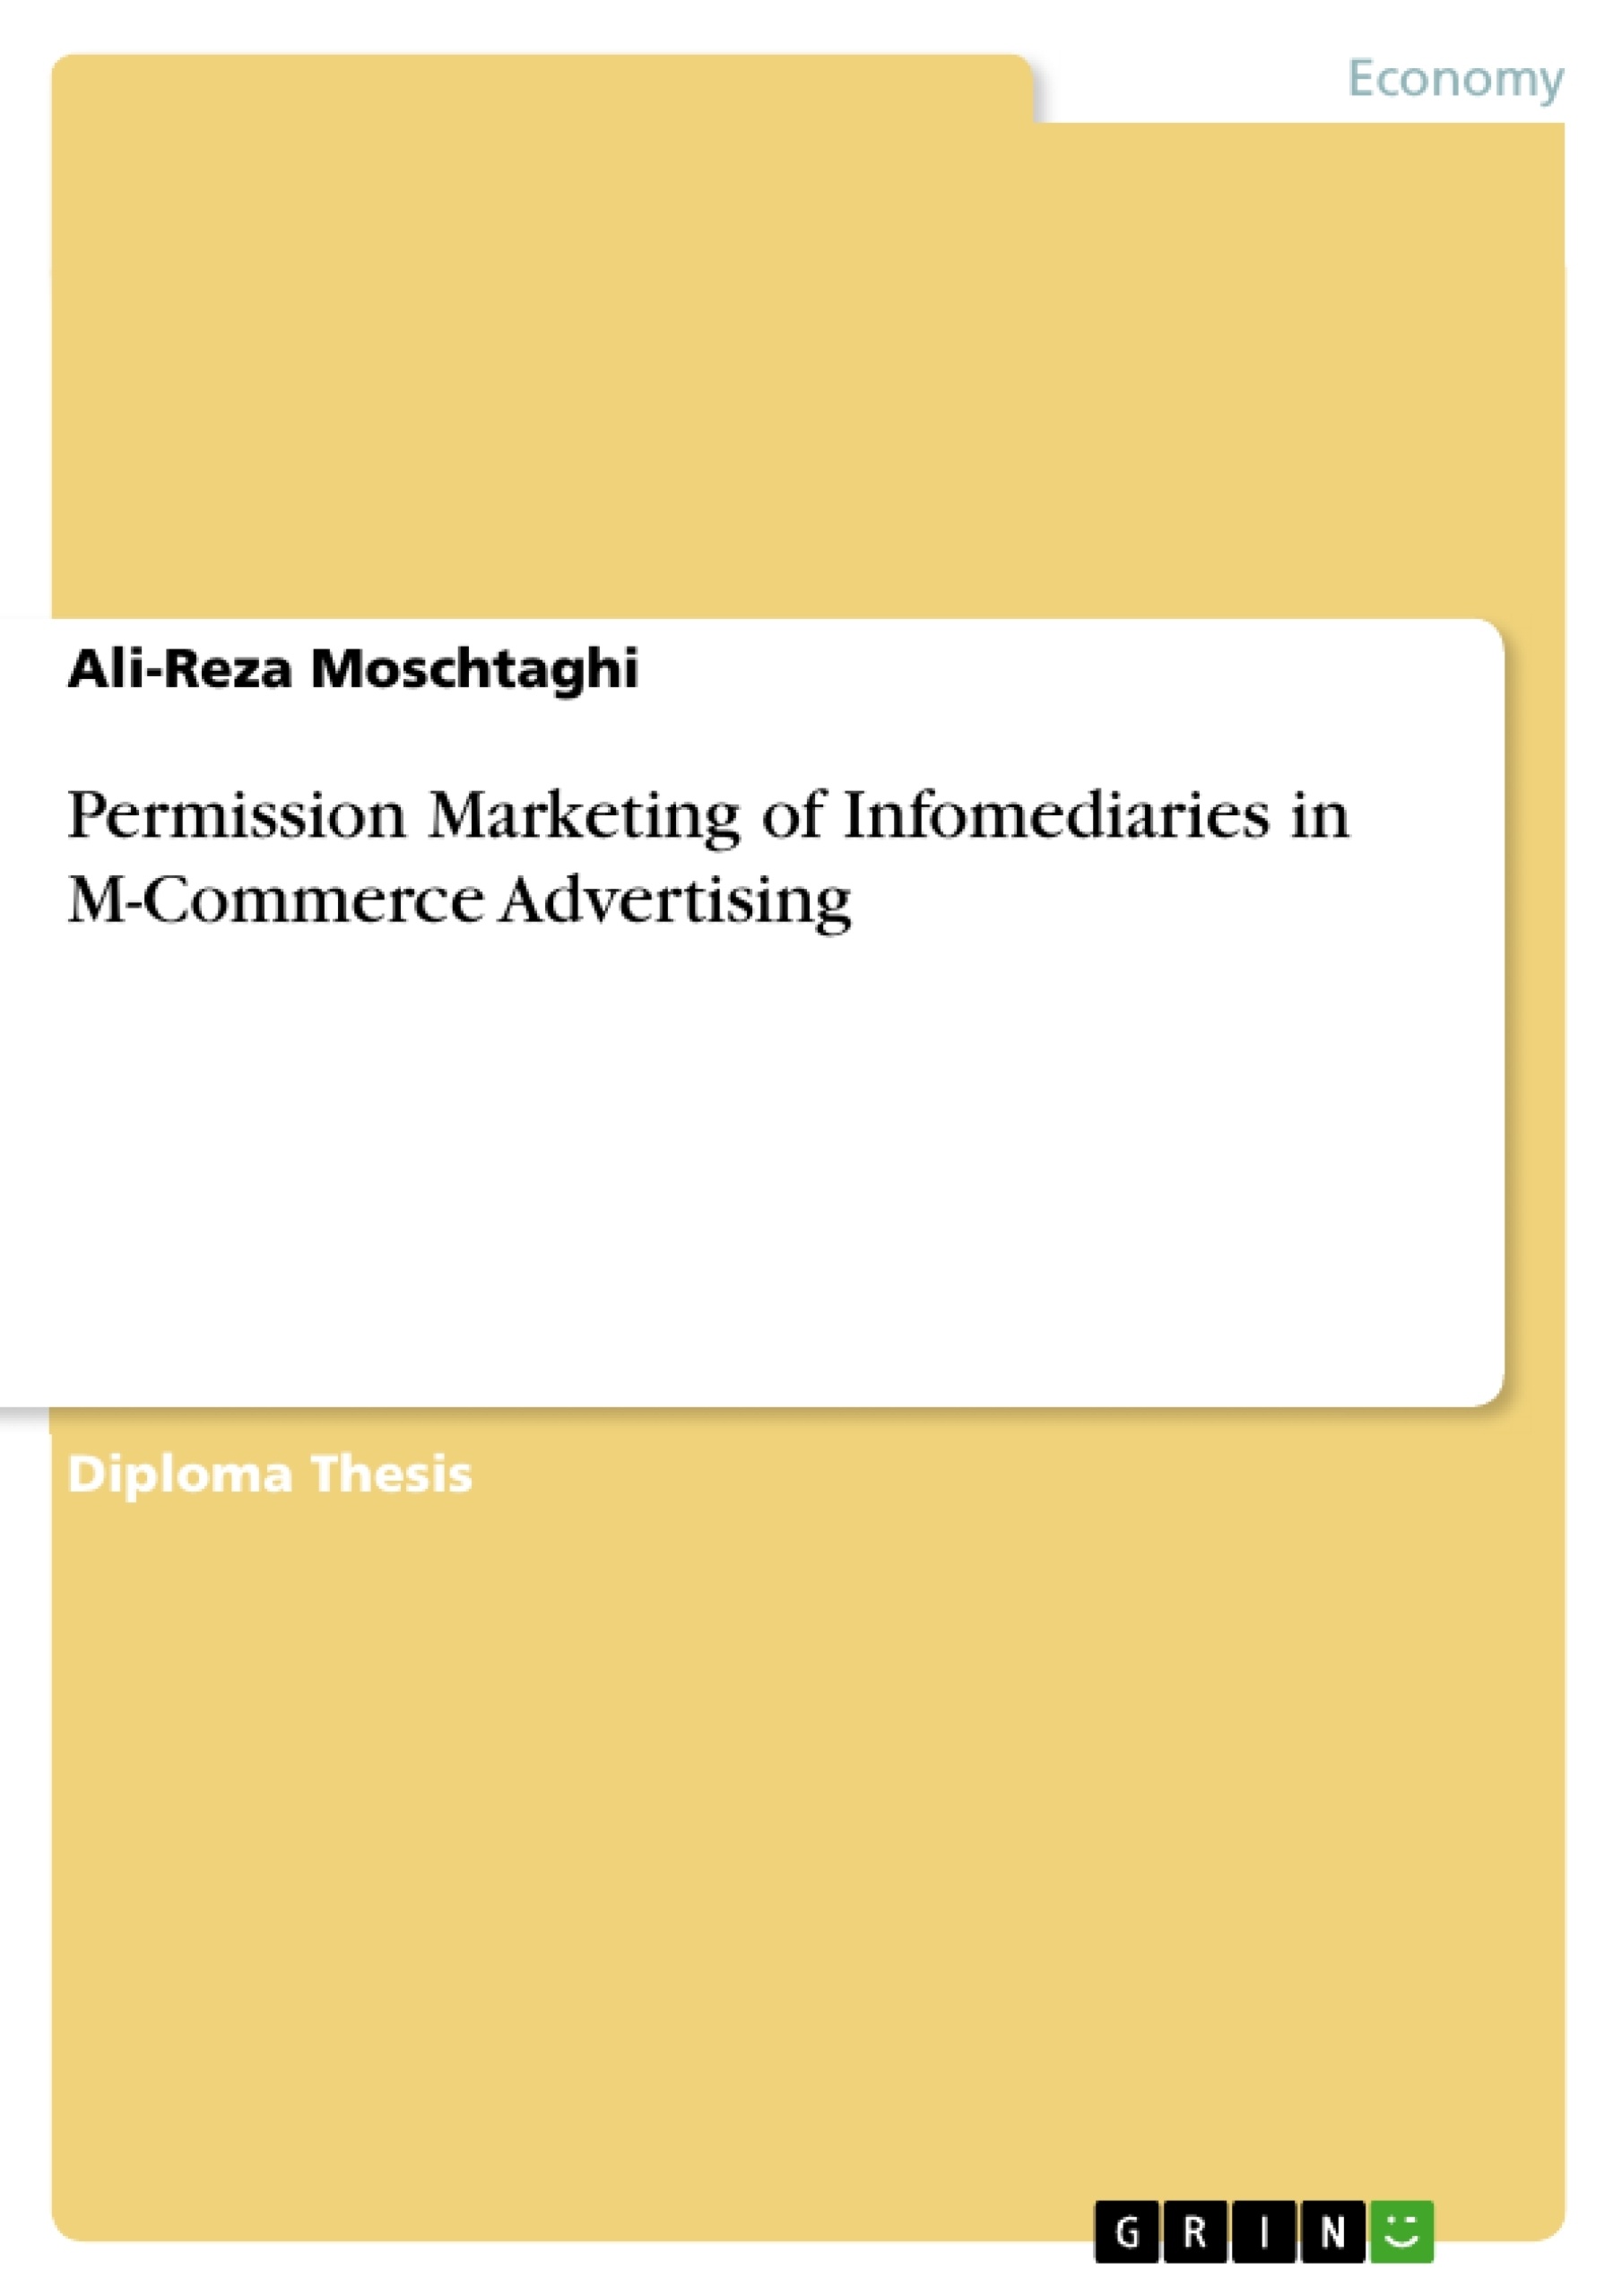 Title: Permission Marketing of Infomediaries in M-Commerce Advertising